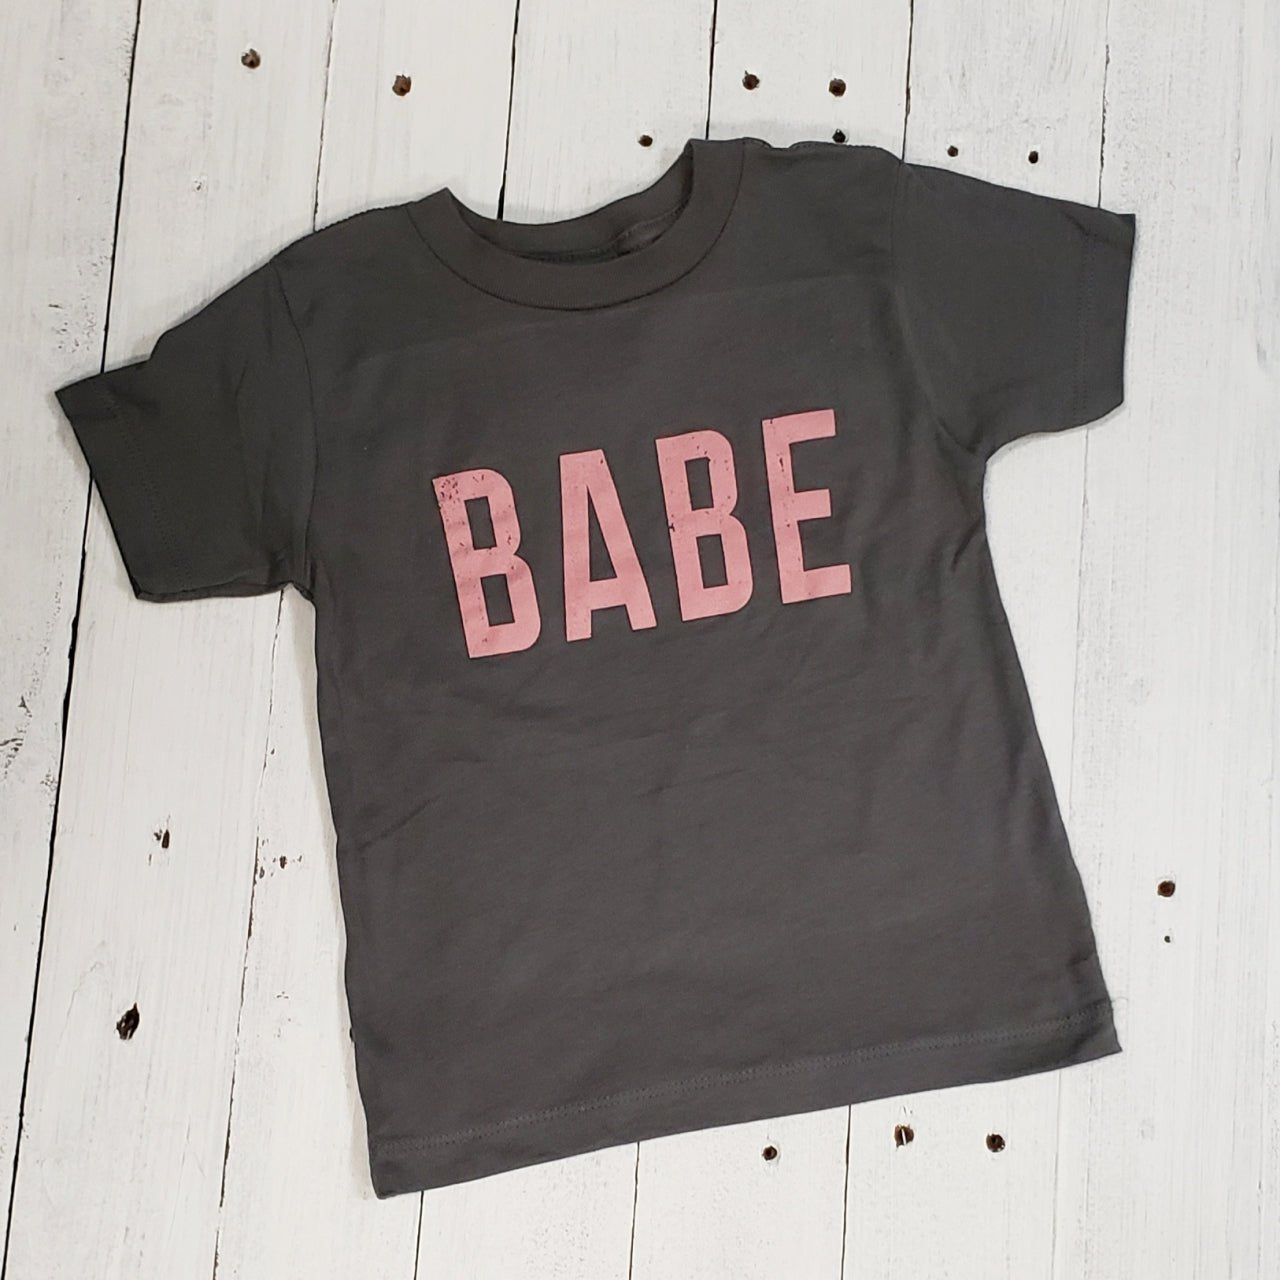 Babe Toddler Tee - The Graphic Tee